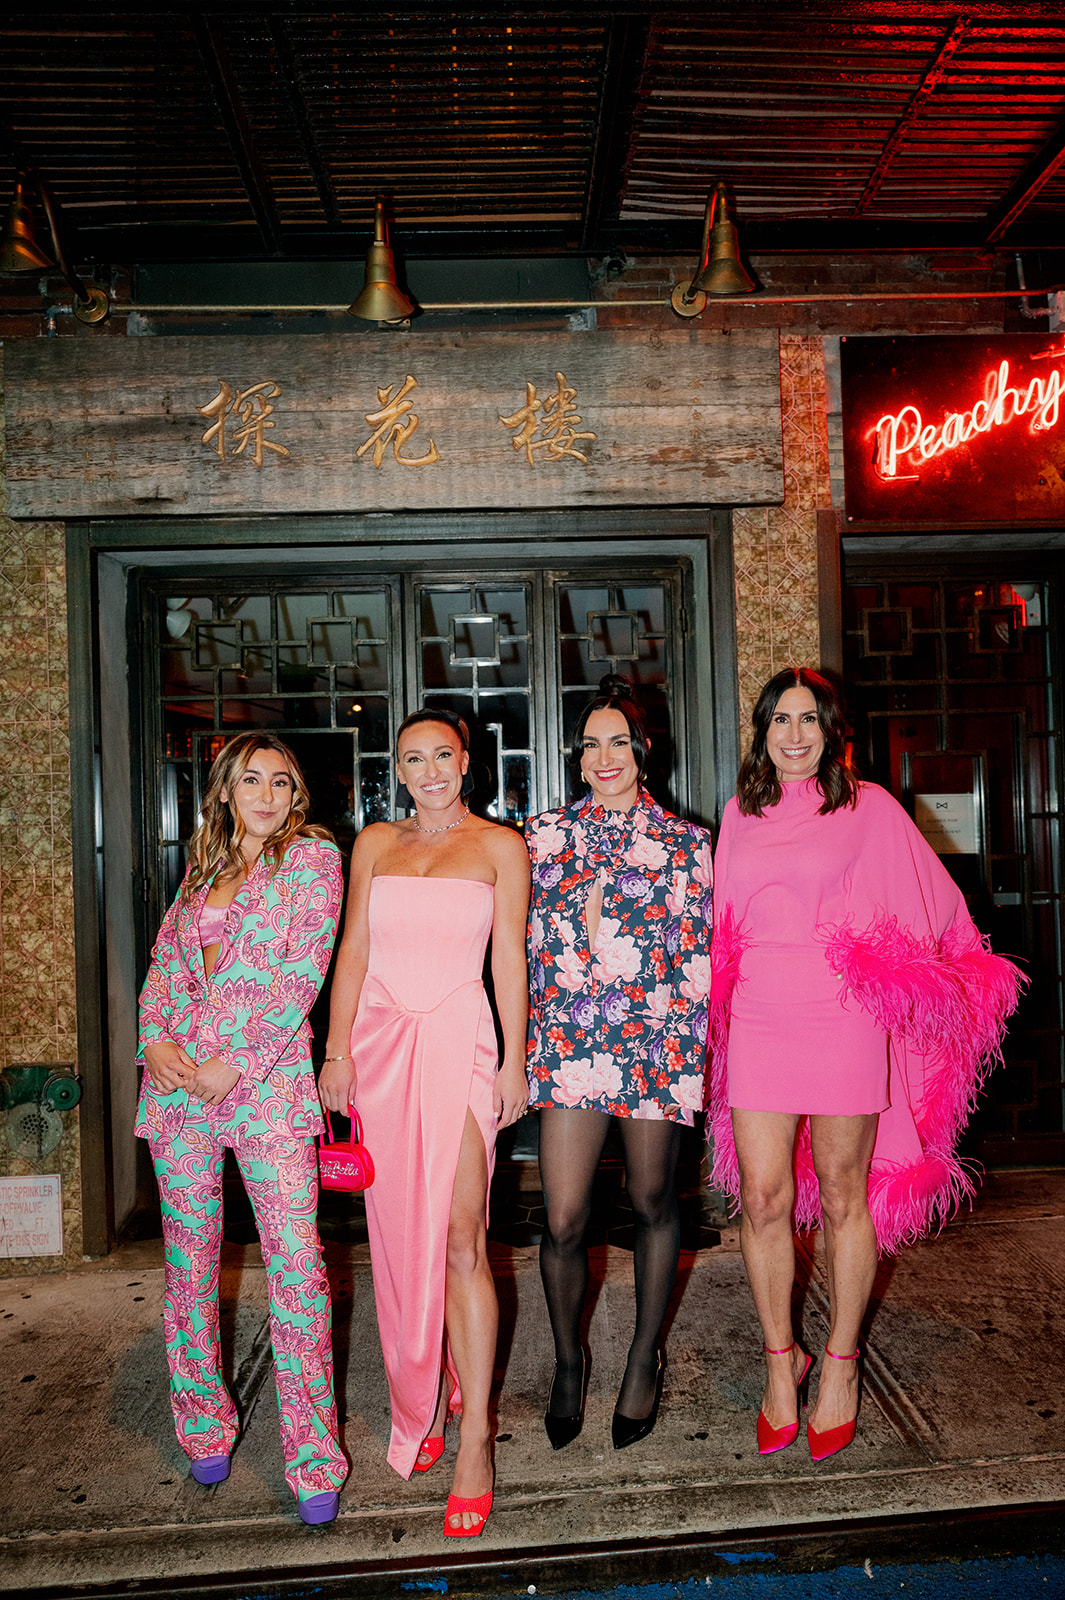 Caroline Keogh and sister's pose outside Peachy's bar for a fun, neon Chinatown bridal shower.